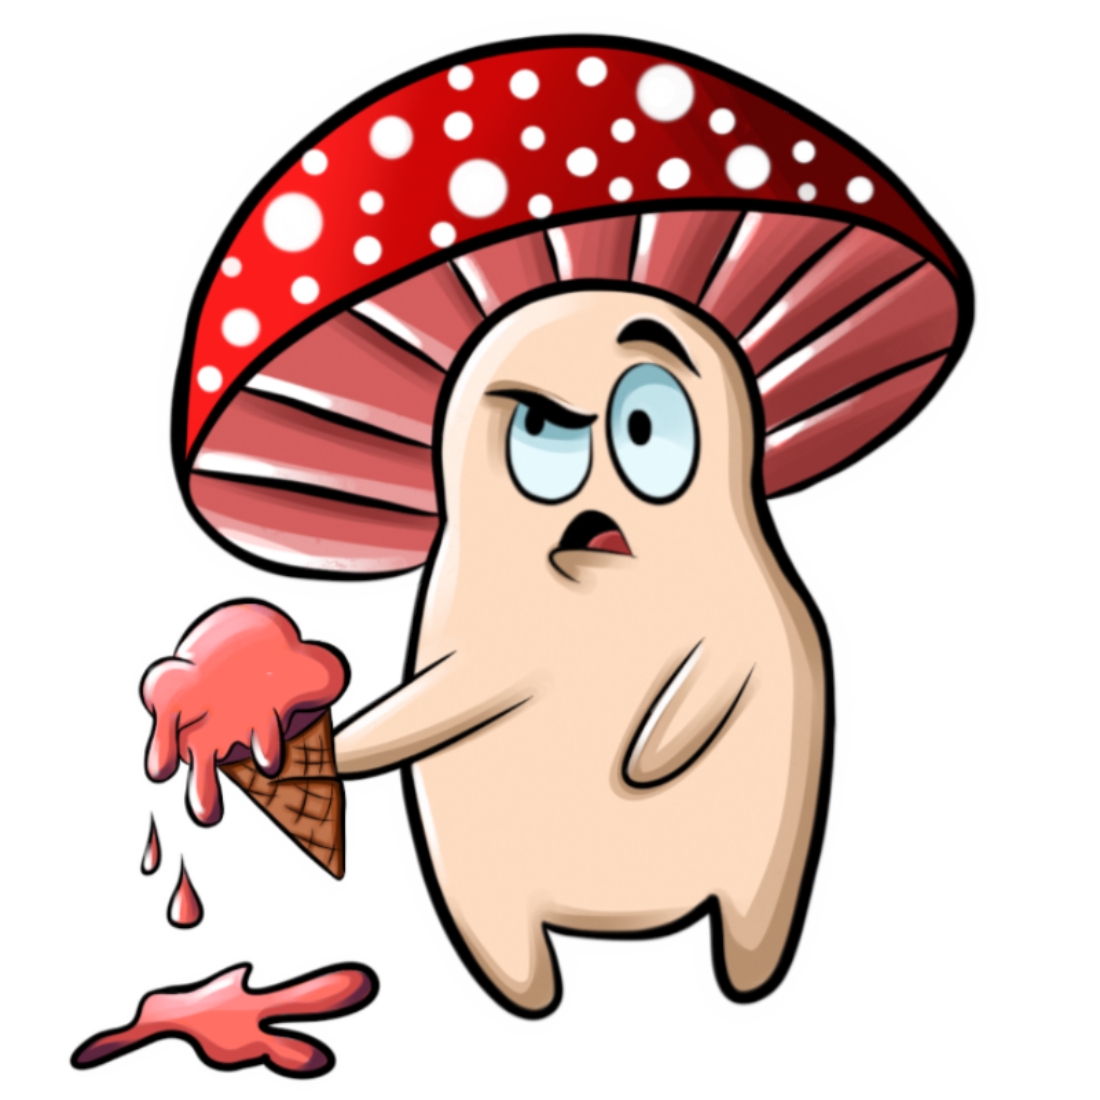 Stikers on Mushrooms cover image.